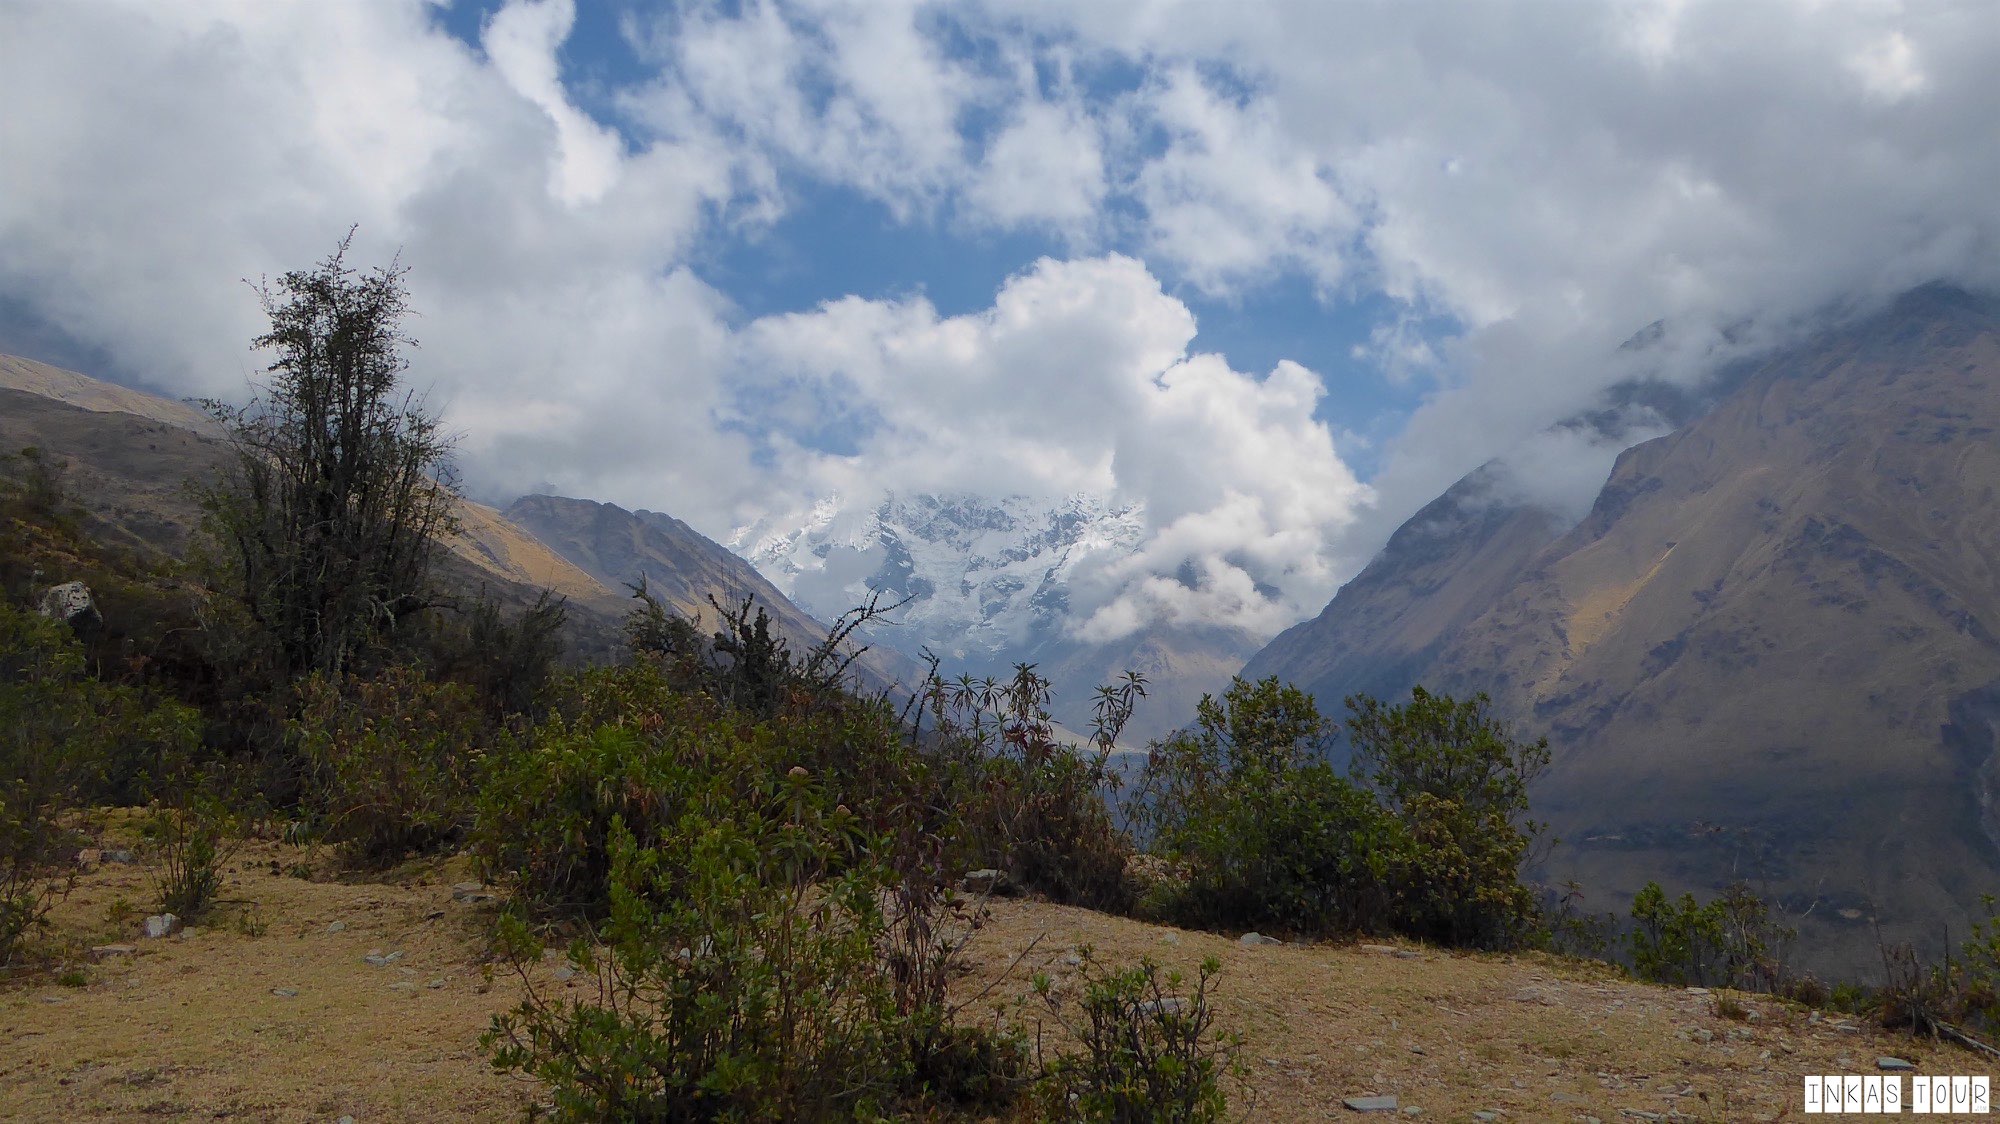 Early on, there is this amazing view of Nevado Salkantay, Salkantay Trek